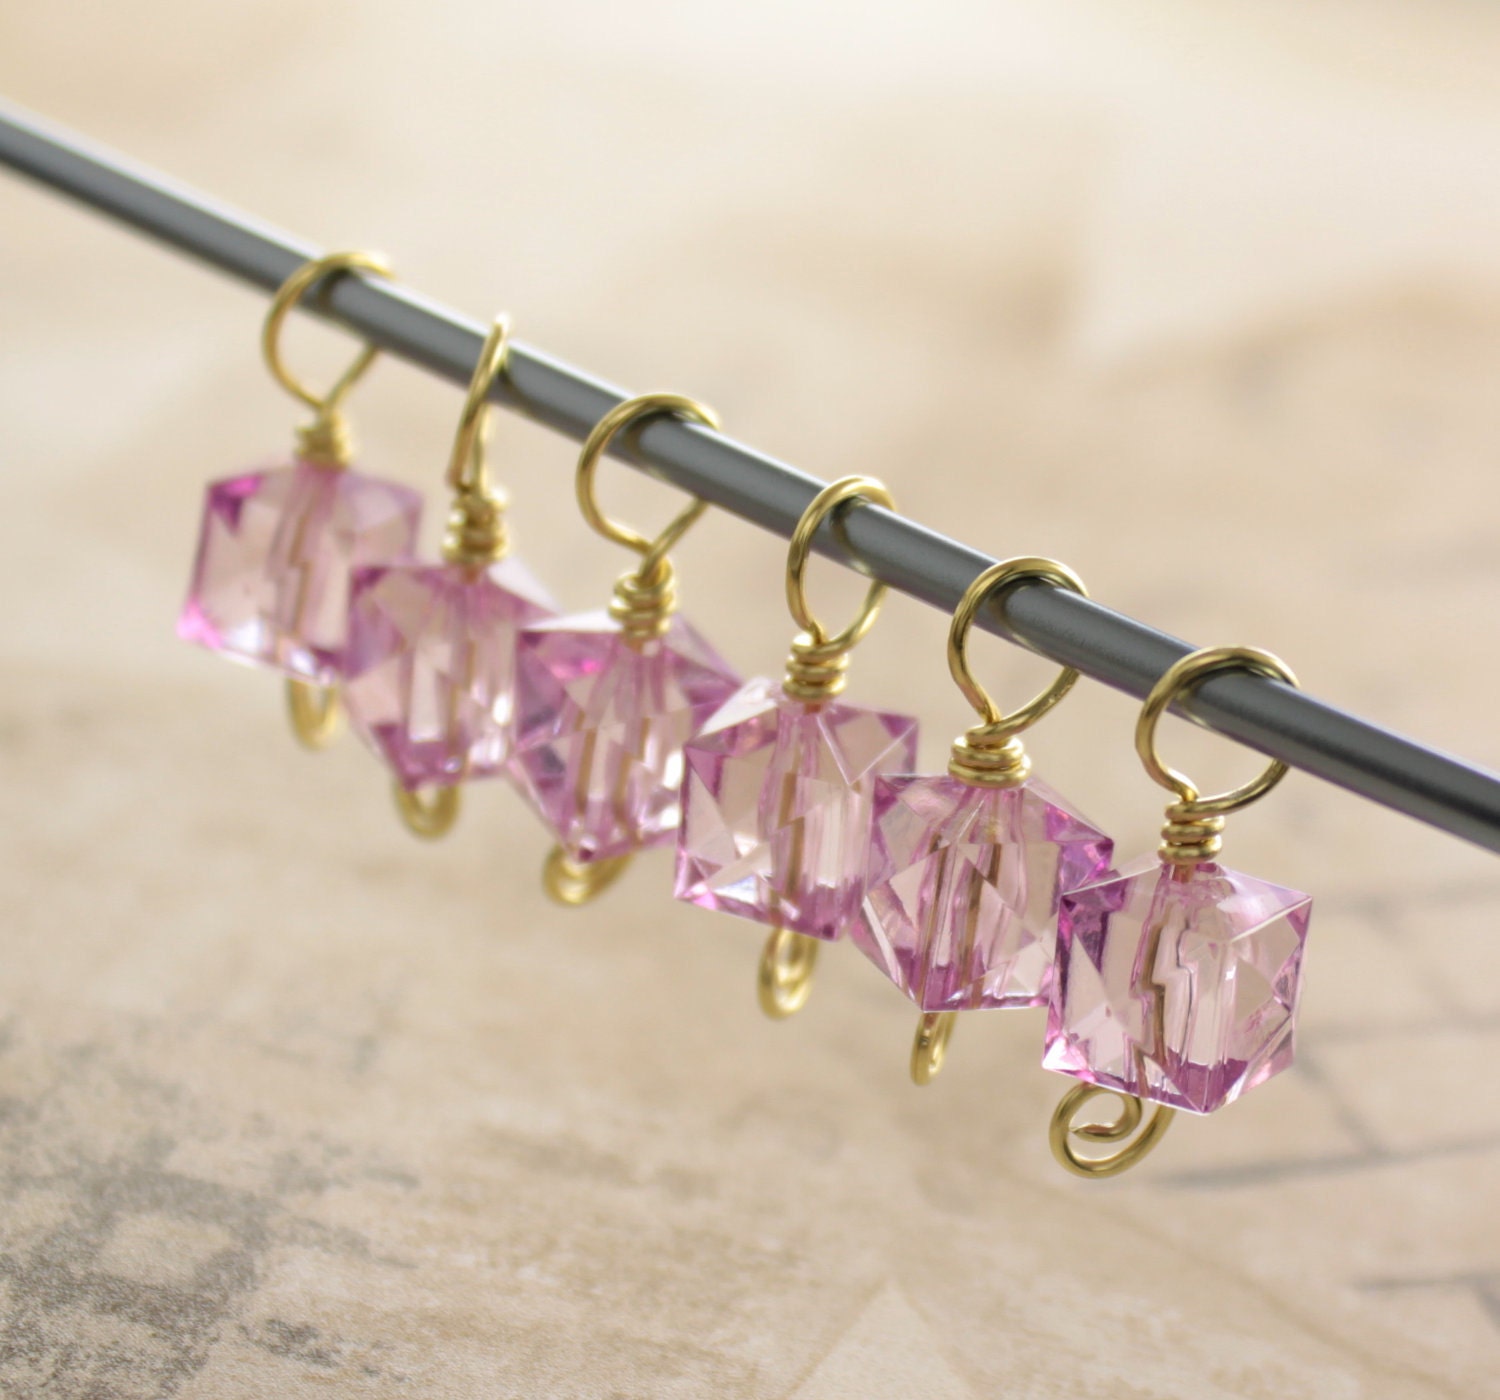 Knitting stitch markers set of 6 markers - pale rose lucite cube faceted beads  - choose your color - IngoDesign